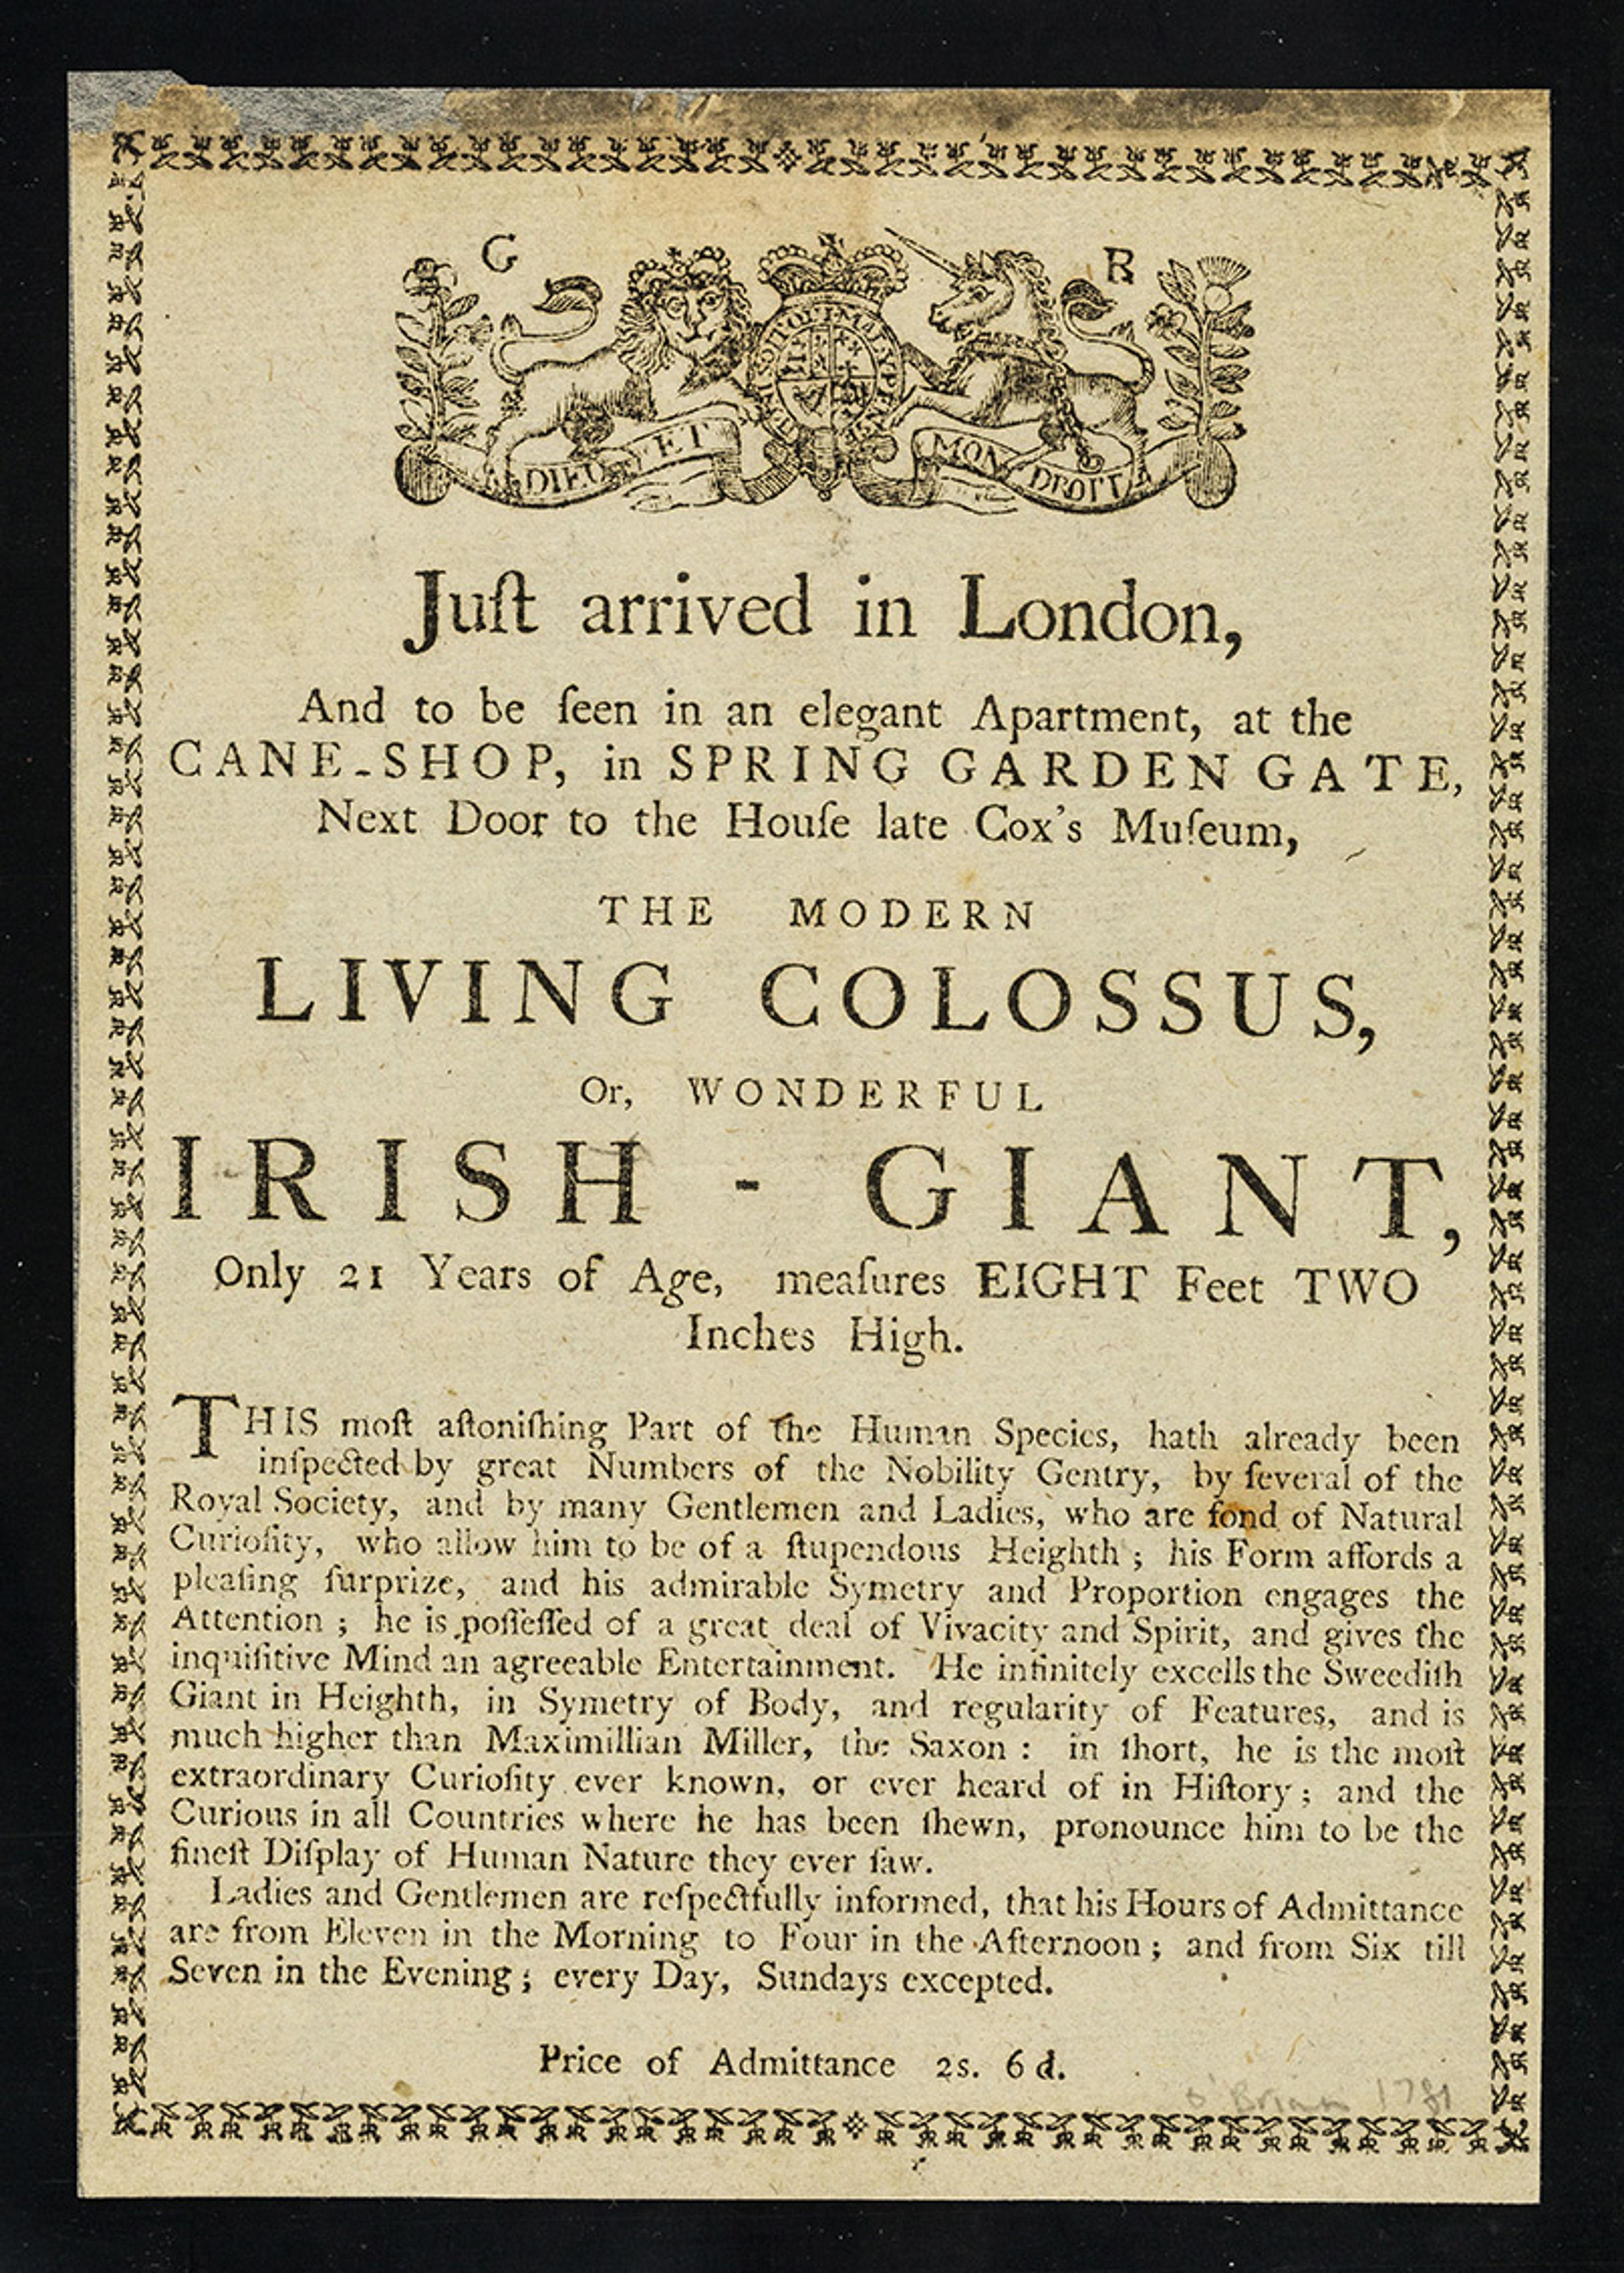 An old newspaper sheet with a headline that reads ‘Just arrived in London’ and goes on to announce the arrival of the Irish Giant